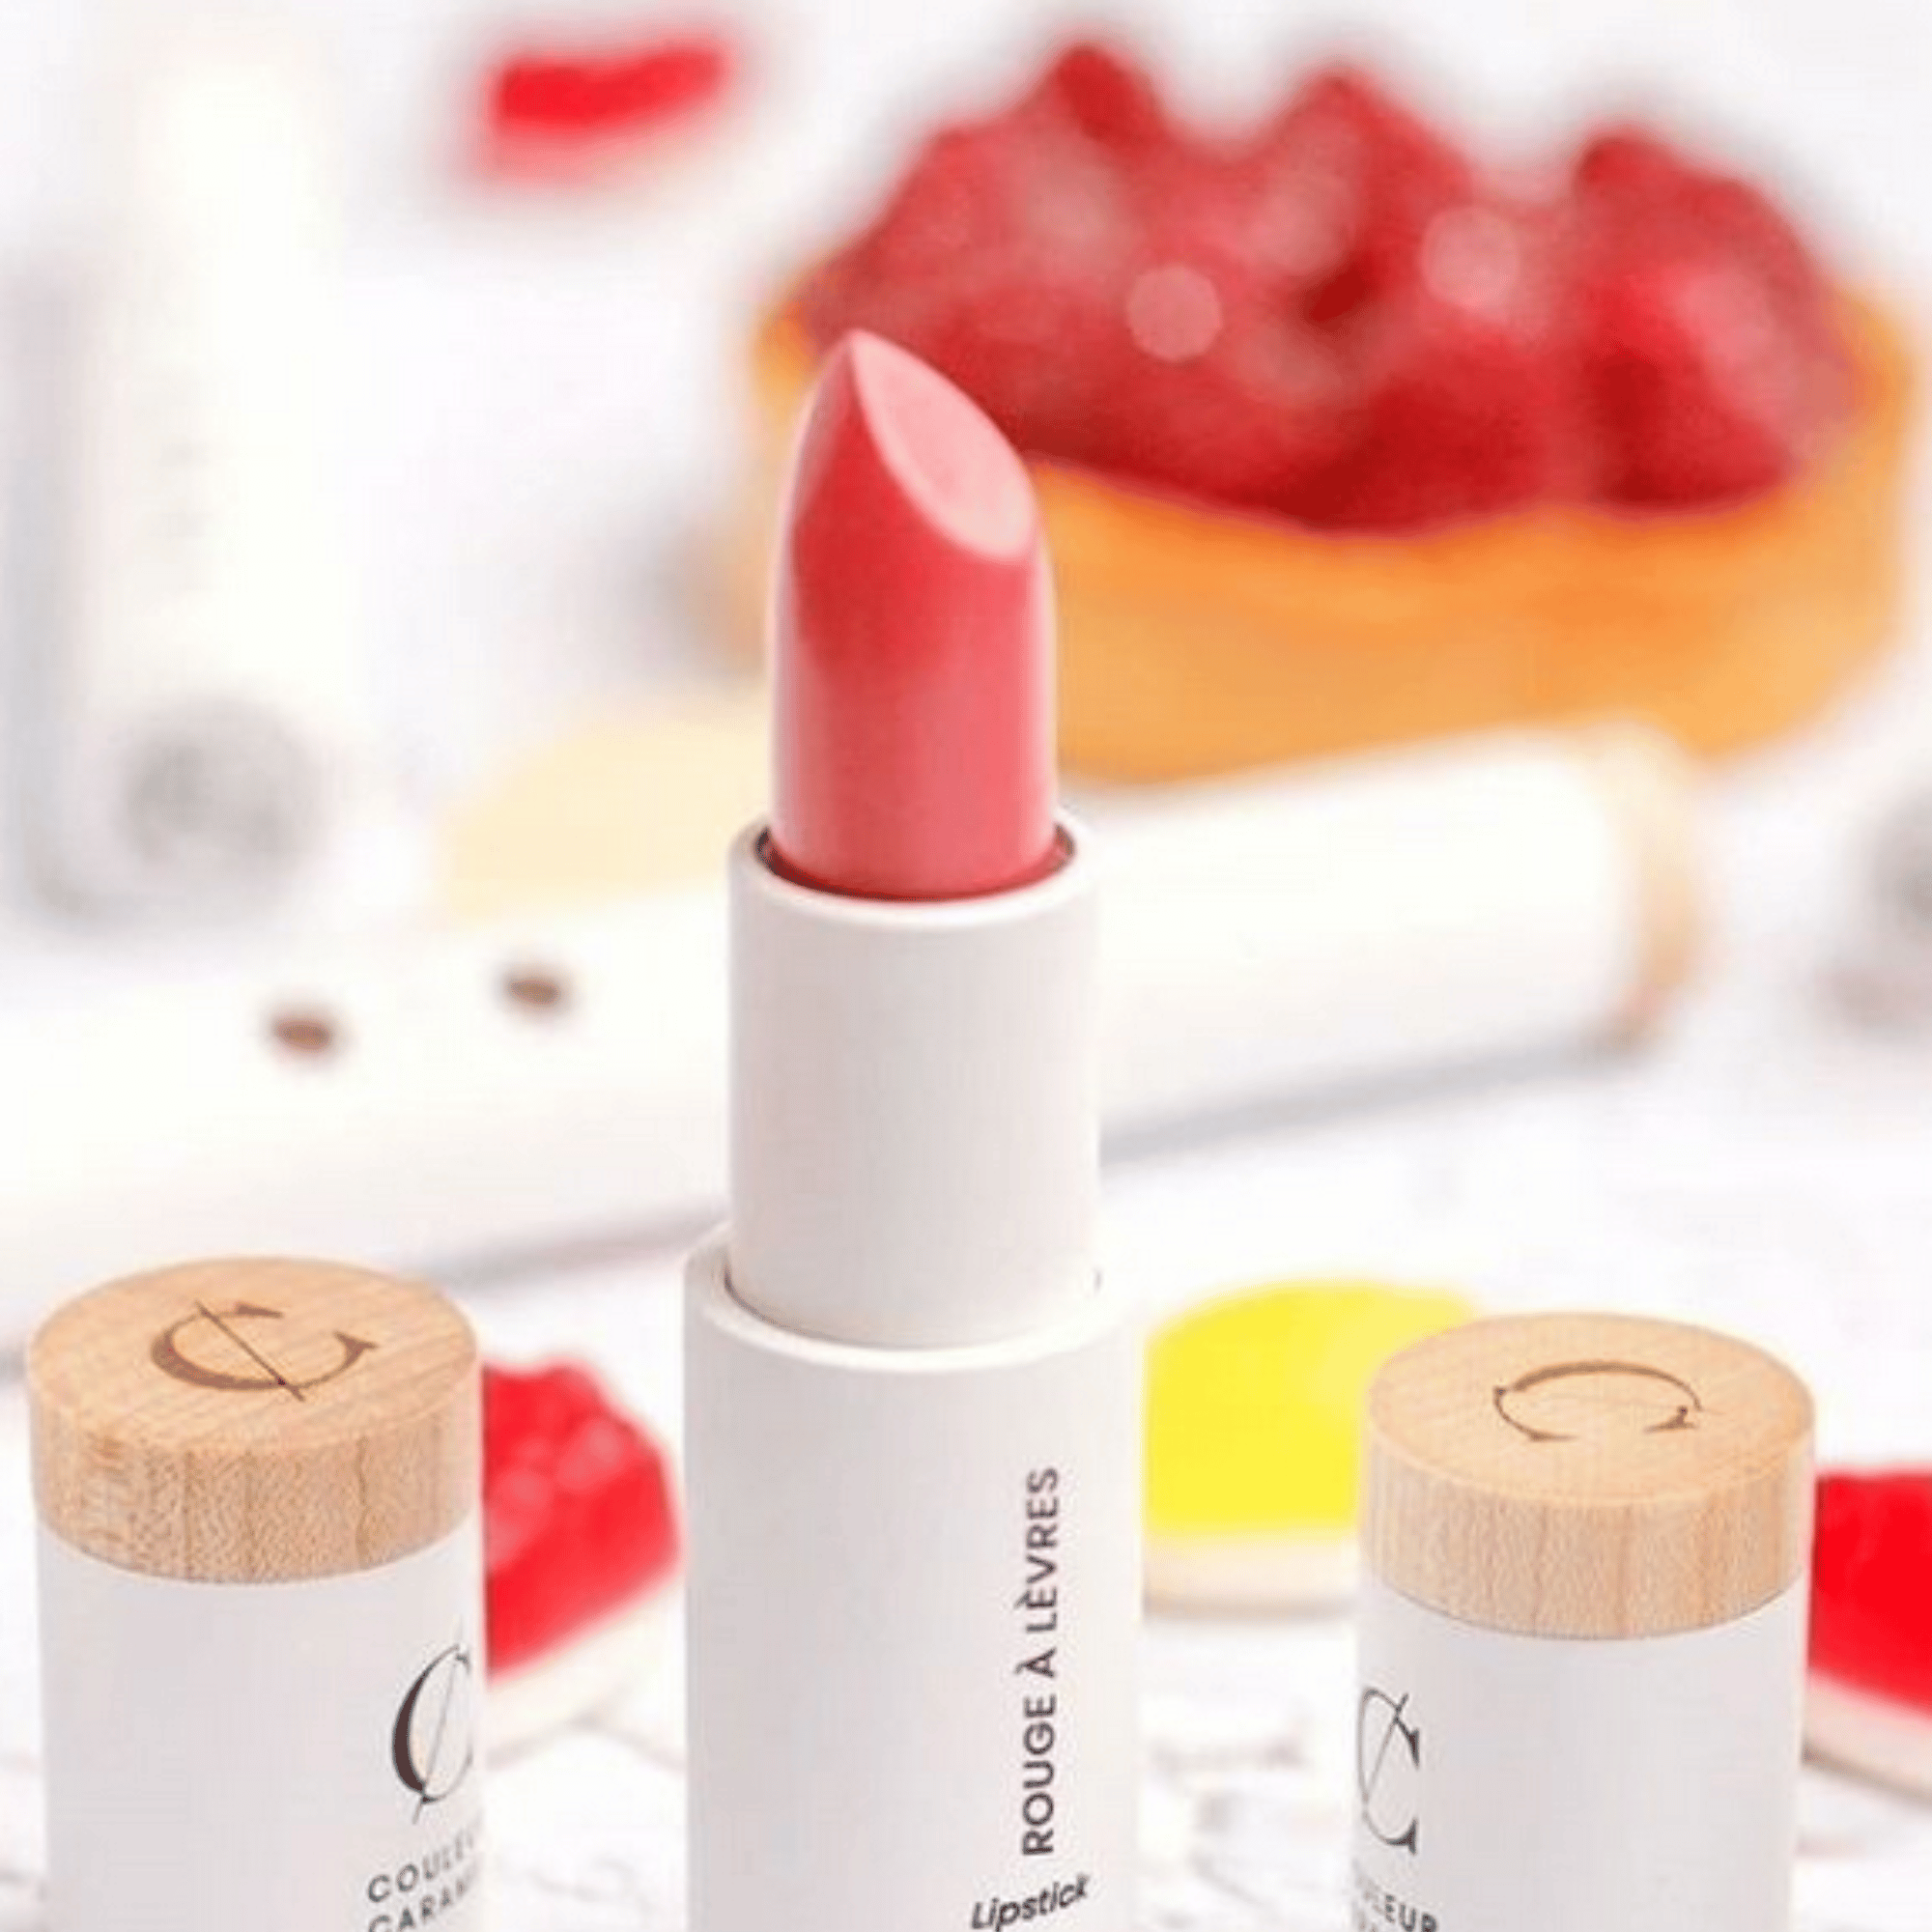 couleur caramel lipsticks on home page